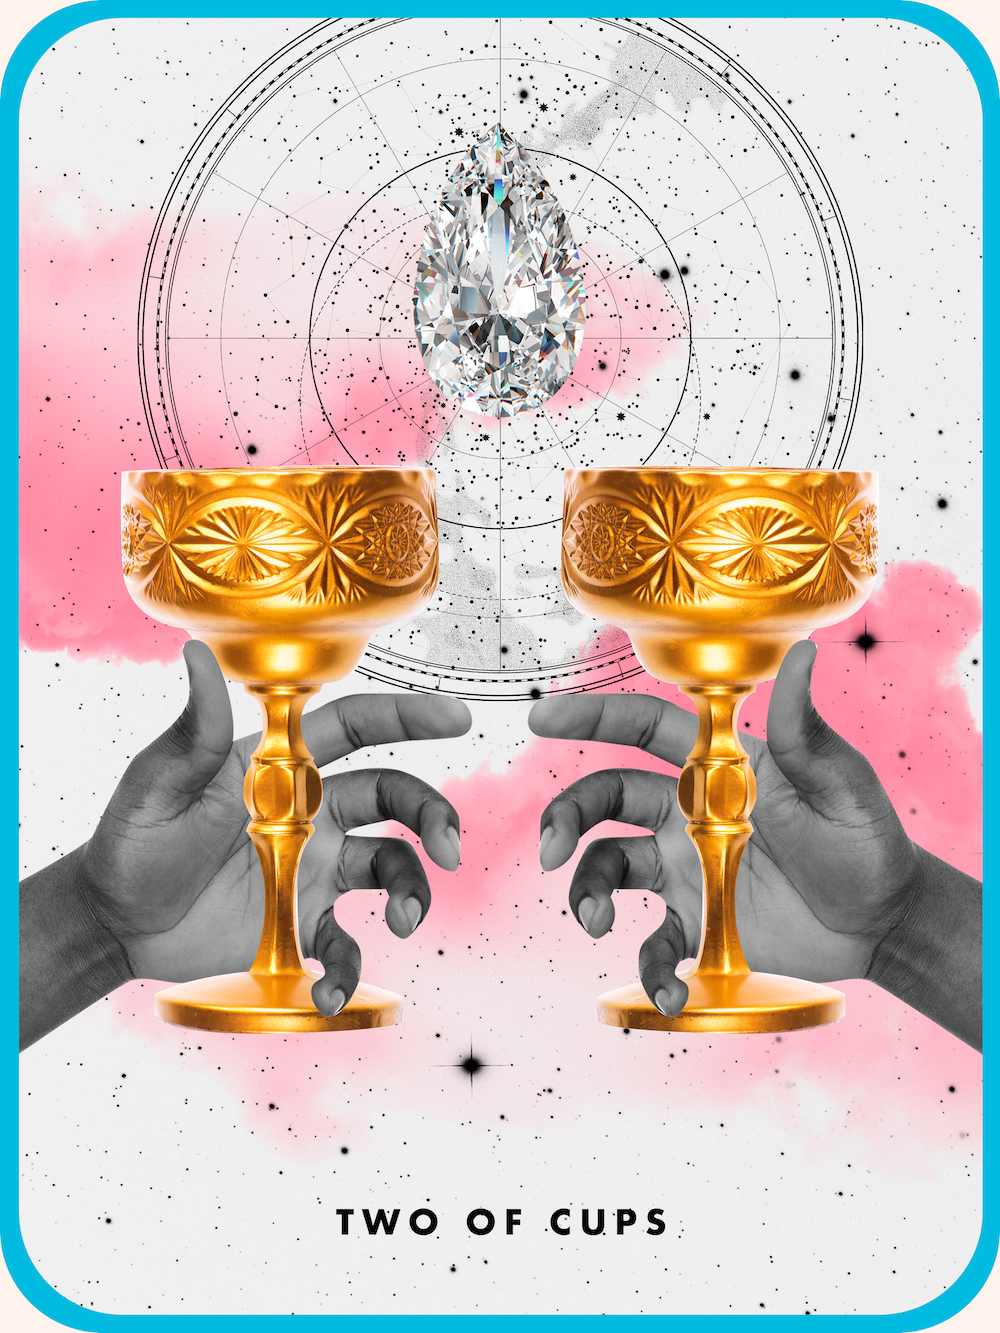 The Two of Cups Tarot Card Guide For Beginners in 2023